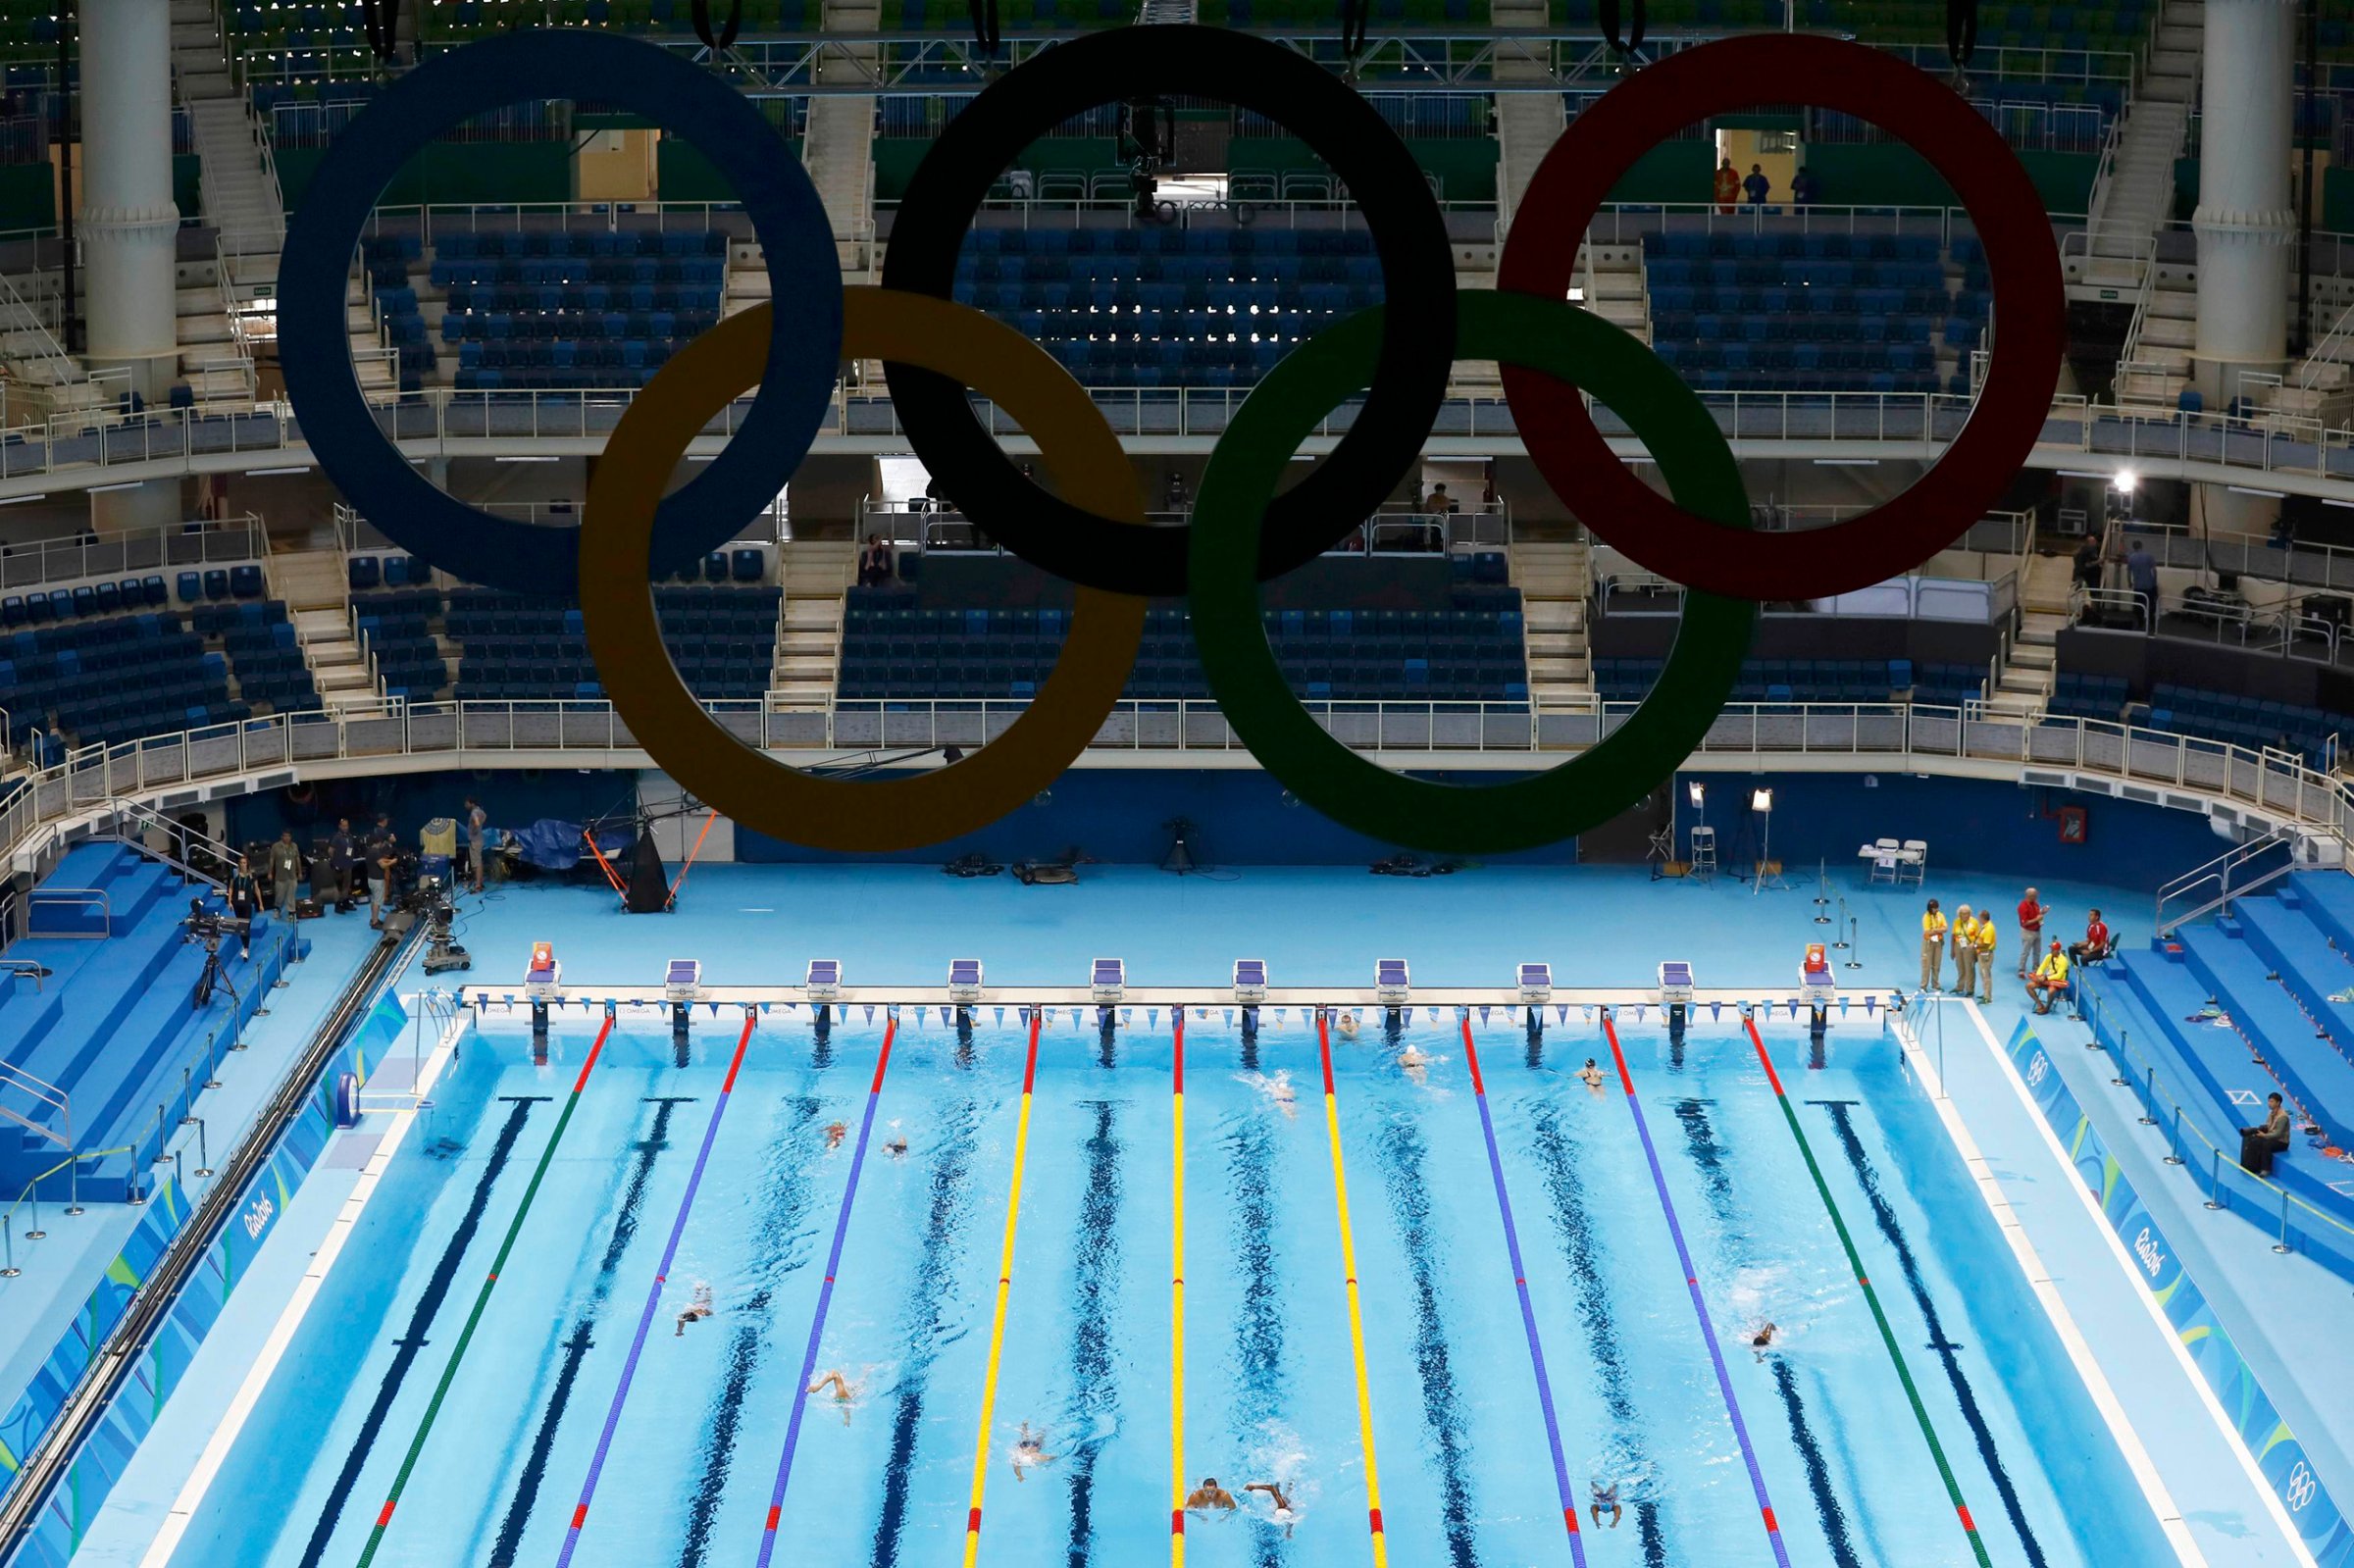 General view of the Olympic swimming venue in Rio de Janeiro on Aug. 02, 2016.